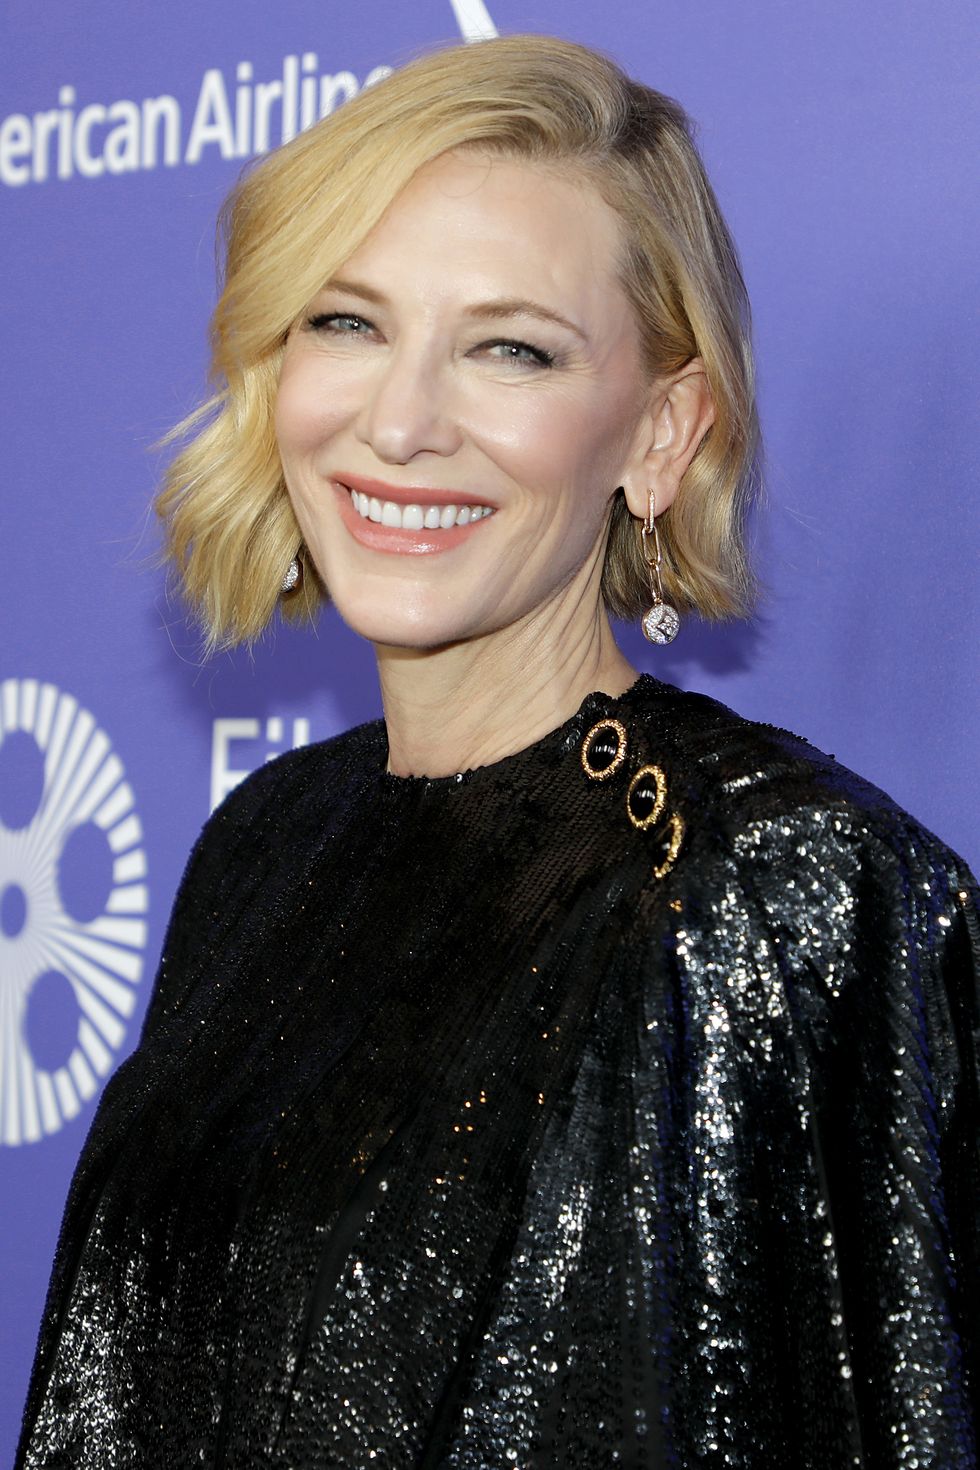 hairstyles for women over 50 cate blanchett with chin length curls